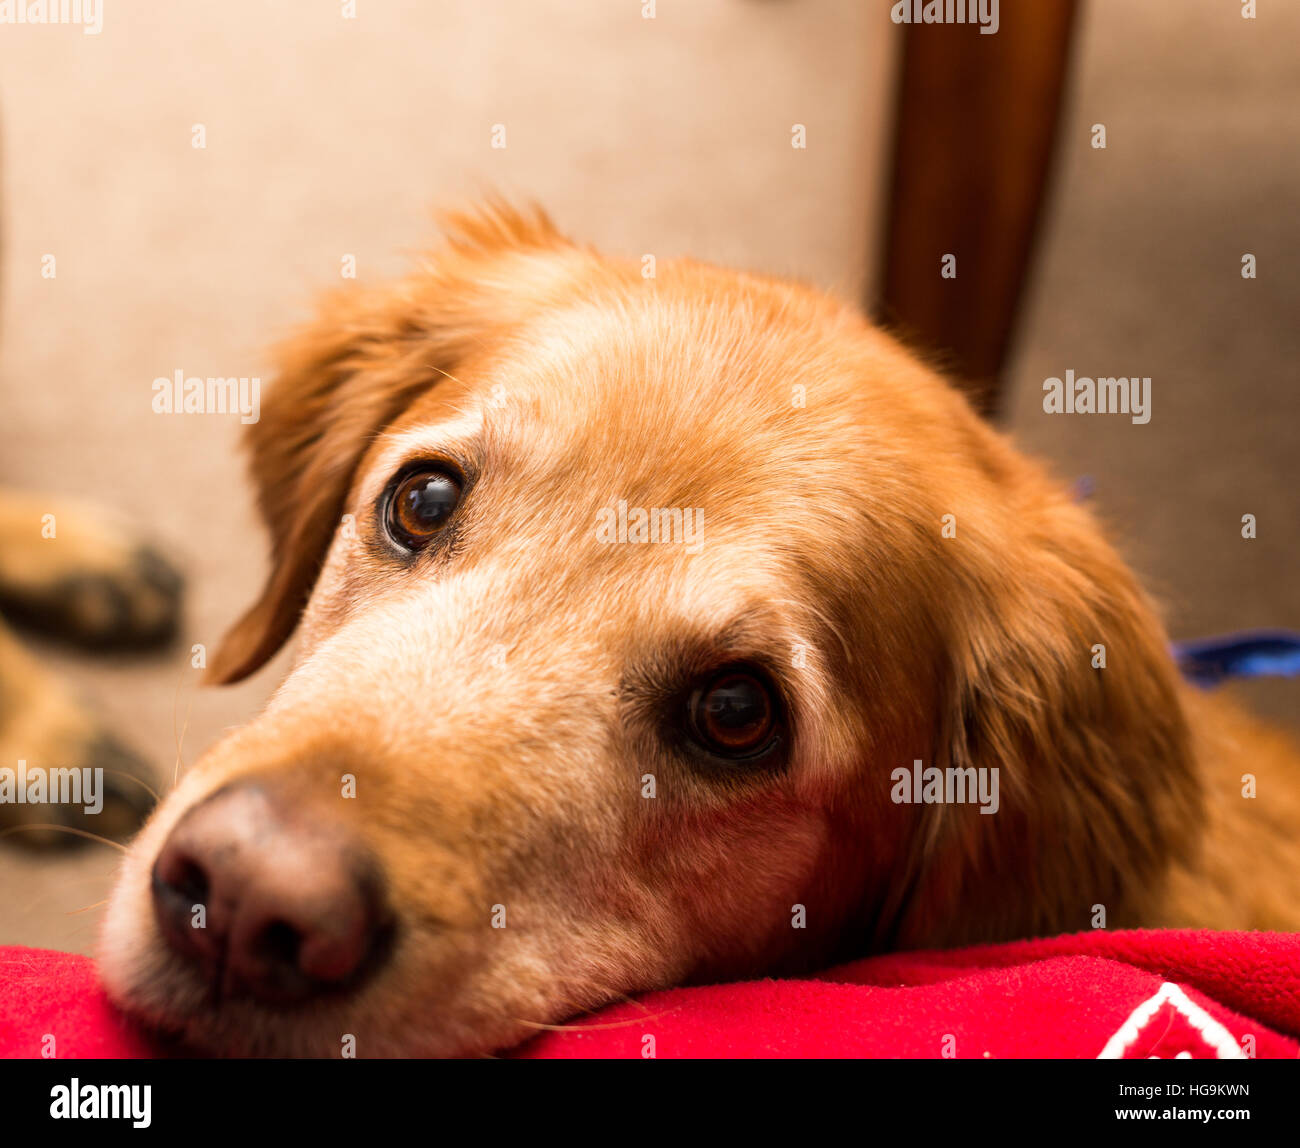 Golden retriever dog laying on a red blanket. Stock Photo